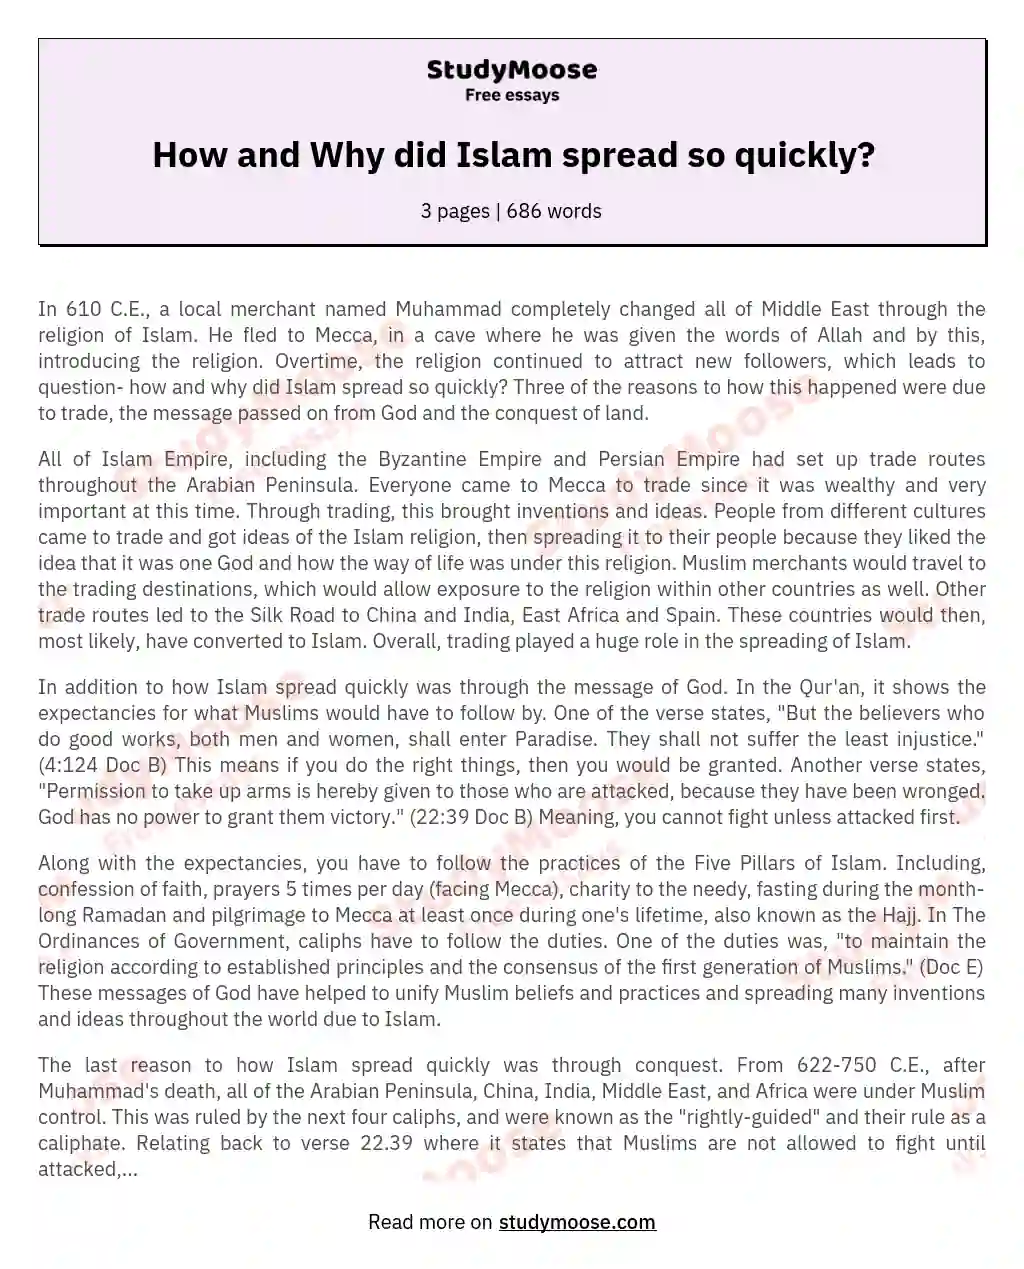 How and Why did Islam spread so quickly? essay